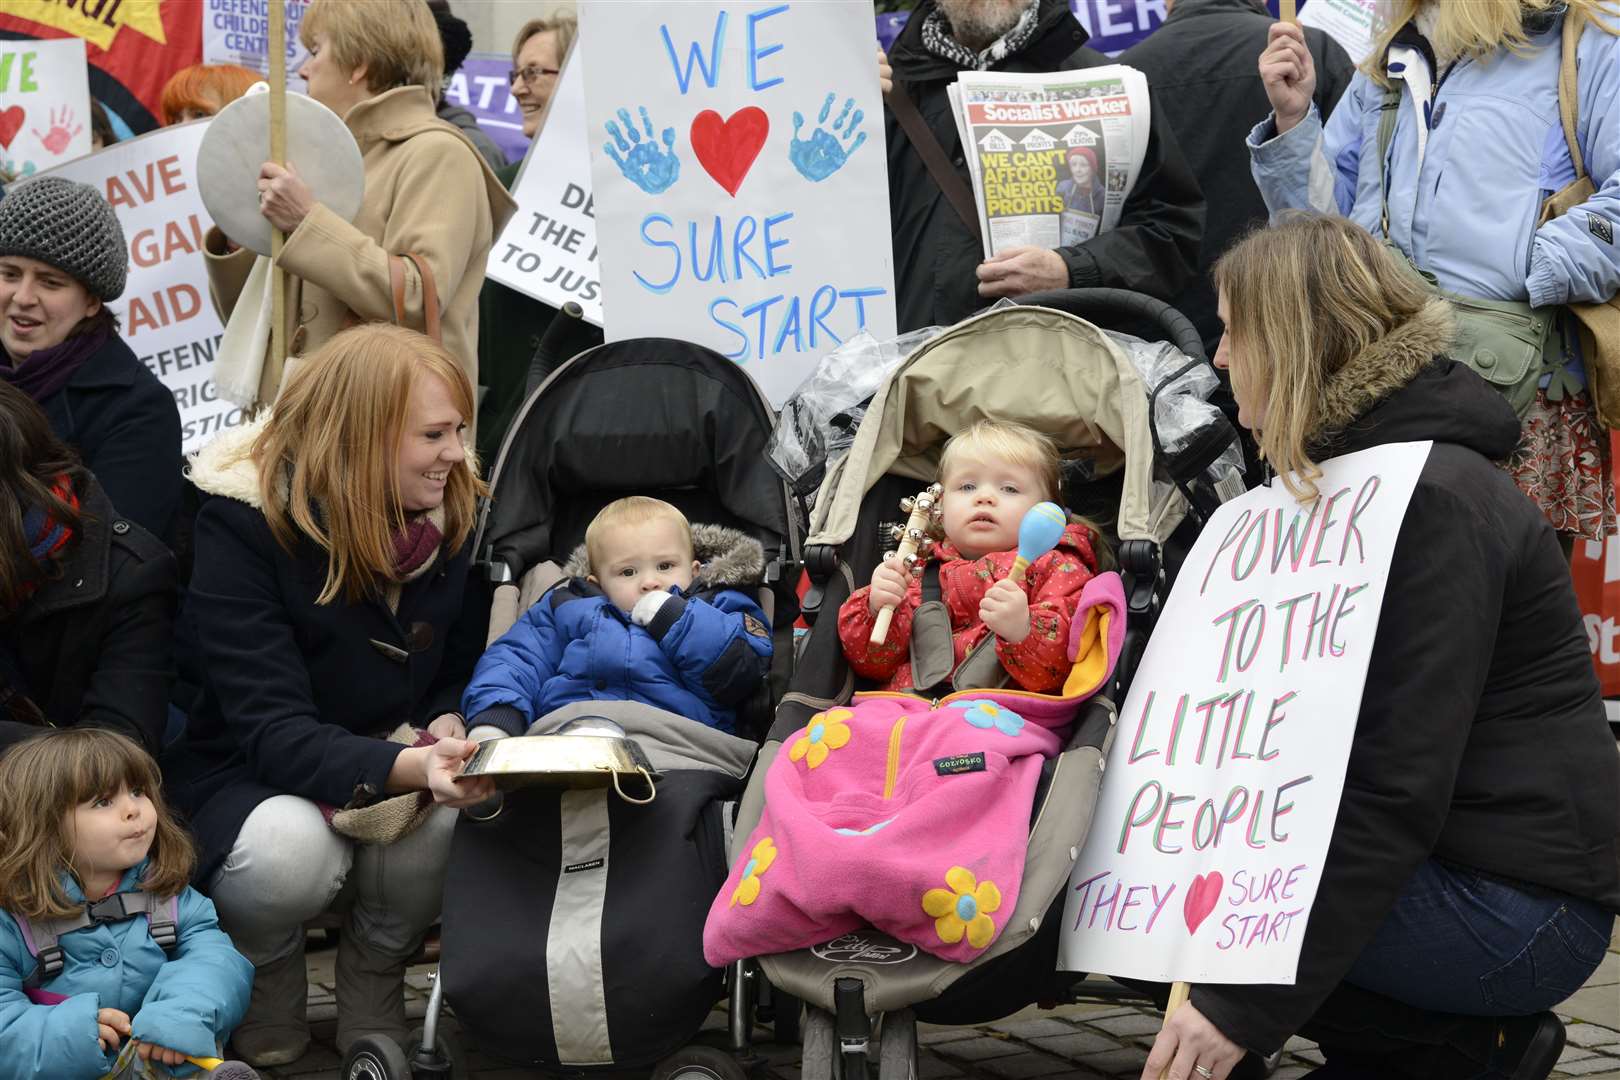 Plans to make cuts to services have proved unpopular in the past, such as the threat to children's centres in 2013/14 which resulted in this protest outside County Hall. Picture: Martin Apps